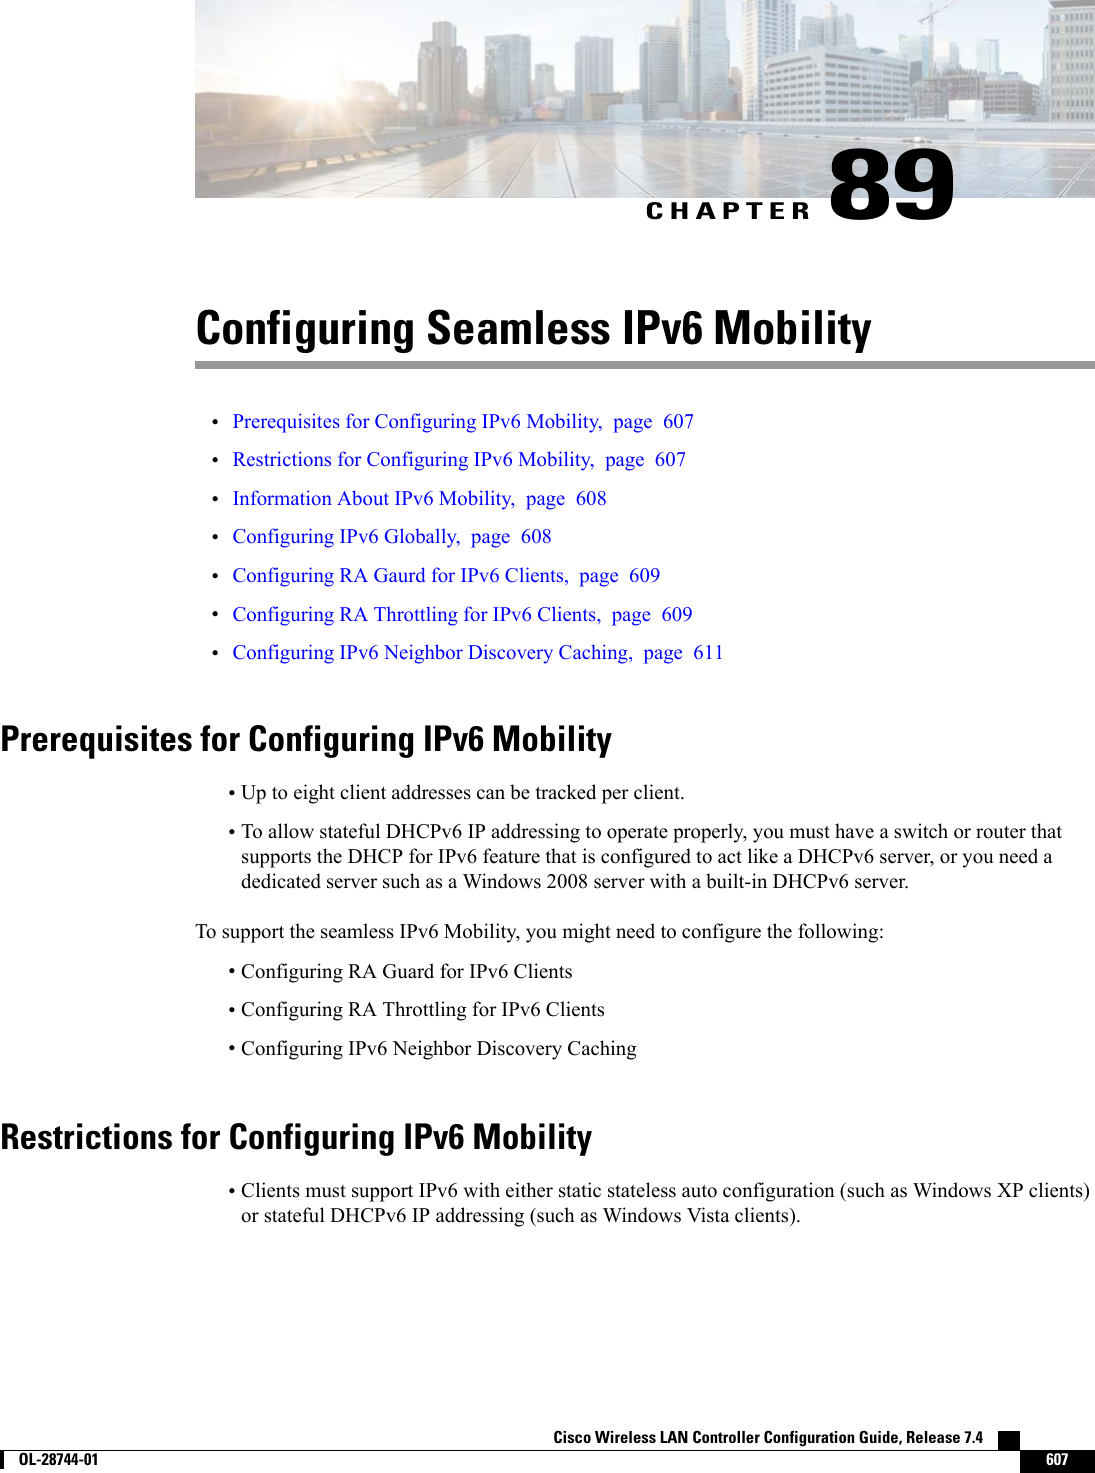 CHAPTER 89Configuring Seamless IPv6 Mobility•Prerequisites for Configuring IPv6 Mobility, page 607•Restrictions for Configuring IPv6 Mobility, page 607•Information About IPv6 Mobility, page 608•Configuring IPv6 Globally, page 608•Configuring RA Gaurd for IPv6 Clients, page 609•Configuring RA Throttling for IPv6 Clients, page 609•Configuring IPv6 Neighbor Discovery Caching, page 611Prerequisites for Configuring IPv6 Mobility•Up to eight client addresses can be tracked per client.•To allow stateful DHCPv6 IP addressing to operate properly, you must have a switch or router thatsupports the DHCP for IPv6 feature that is configured to act like a DHCPv6 server, or you need adedicated server such as a Windows 2008 server with a built-in DHCPv6 server.To support the seamless IPv6 Mobility, you might need to configure the following:•Configuring RA Guard for IPv6 Clients•Configuring RA Throttling for IPv6 Clients•Configuring IPv6 Neighbor Discovery CachingRestrictions for Configuring IPv6 Mobility•Clients must support IPv6 with either static stateless auto configuration (such as Windows XP clients)or stateful DHCPv6 IP addressing (such as Windows Vista clients).Cisco Wireless LAN Controller Configuration Guide, Release 7.4        OL-28744-01 607